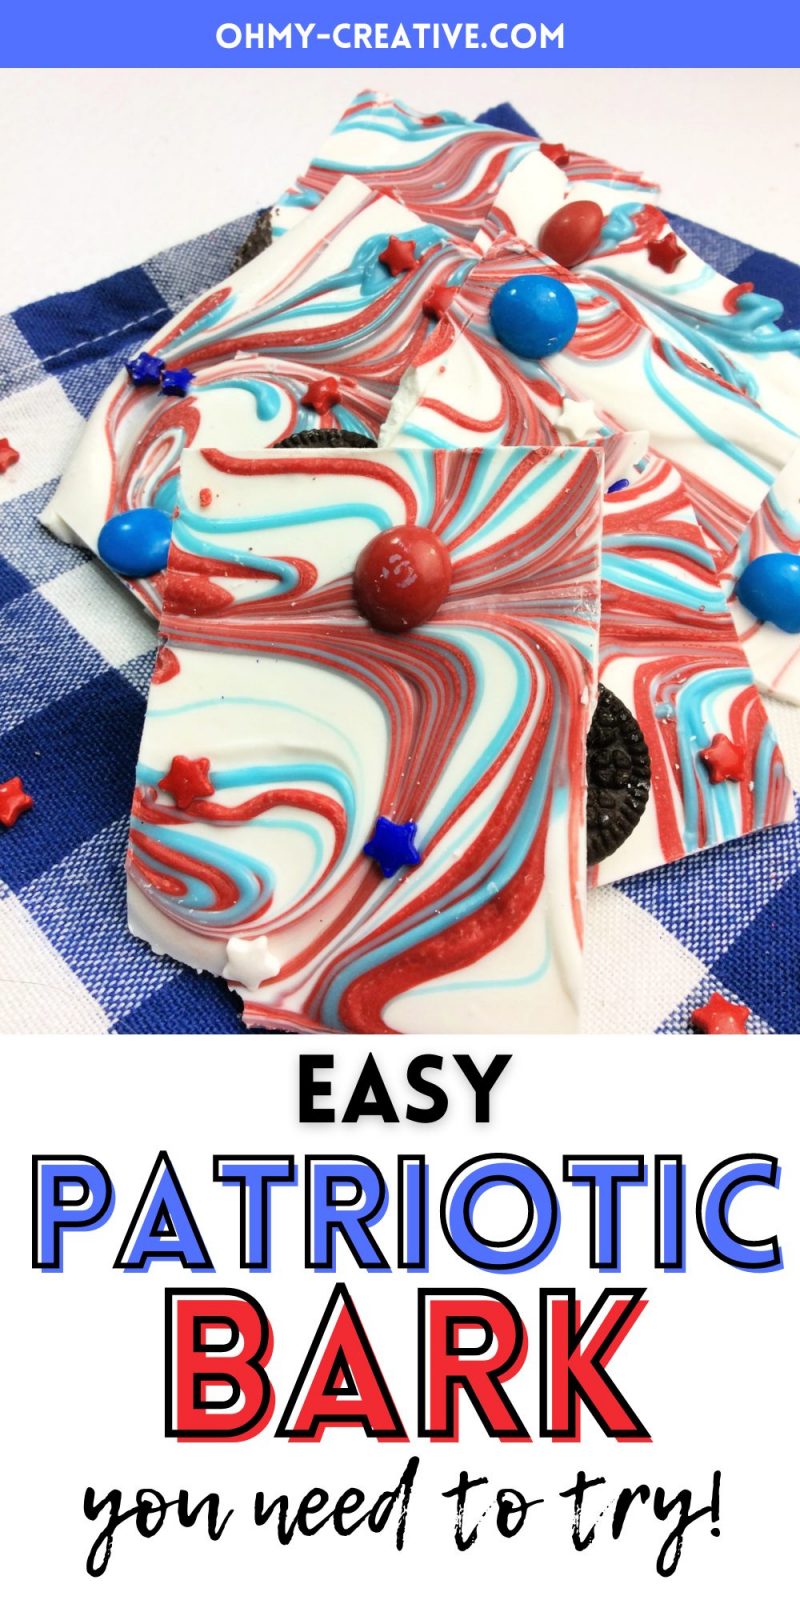 Red, white and blue candy park with star sprinkles and m & m's on a blue checked background.